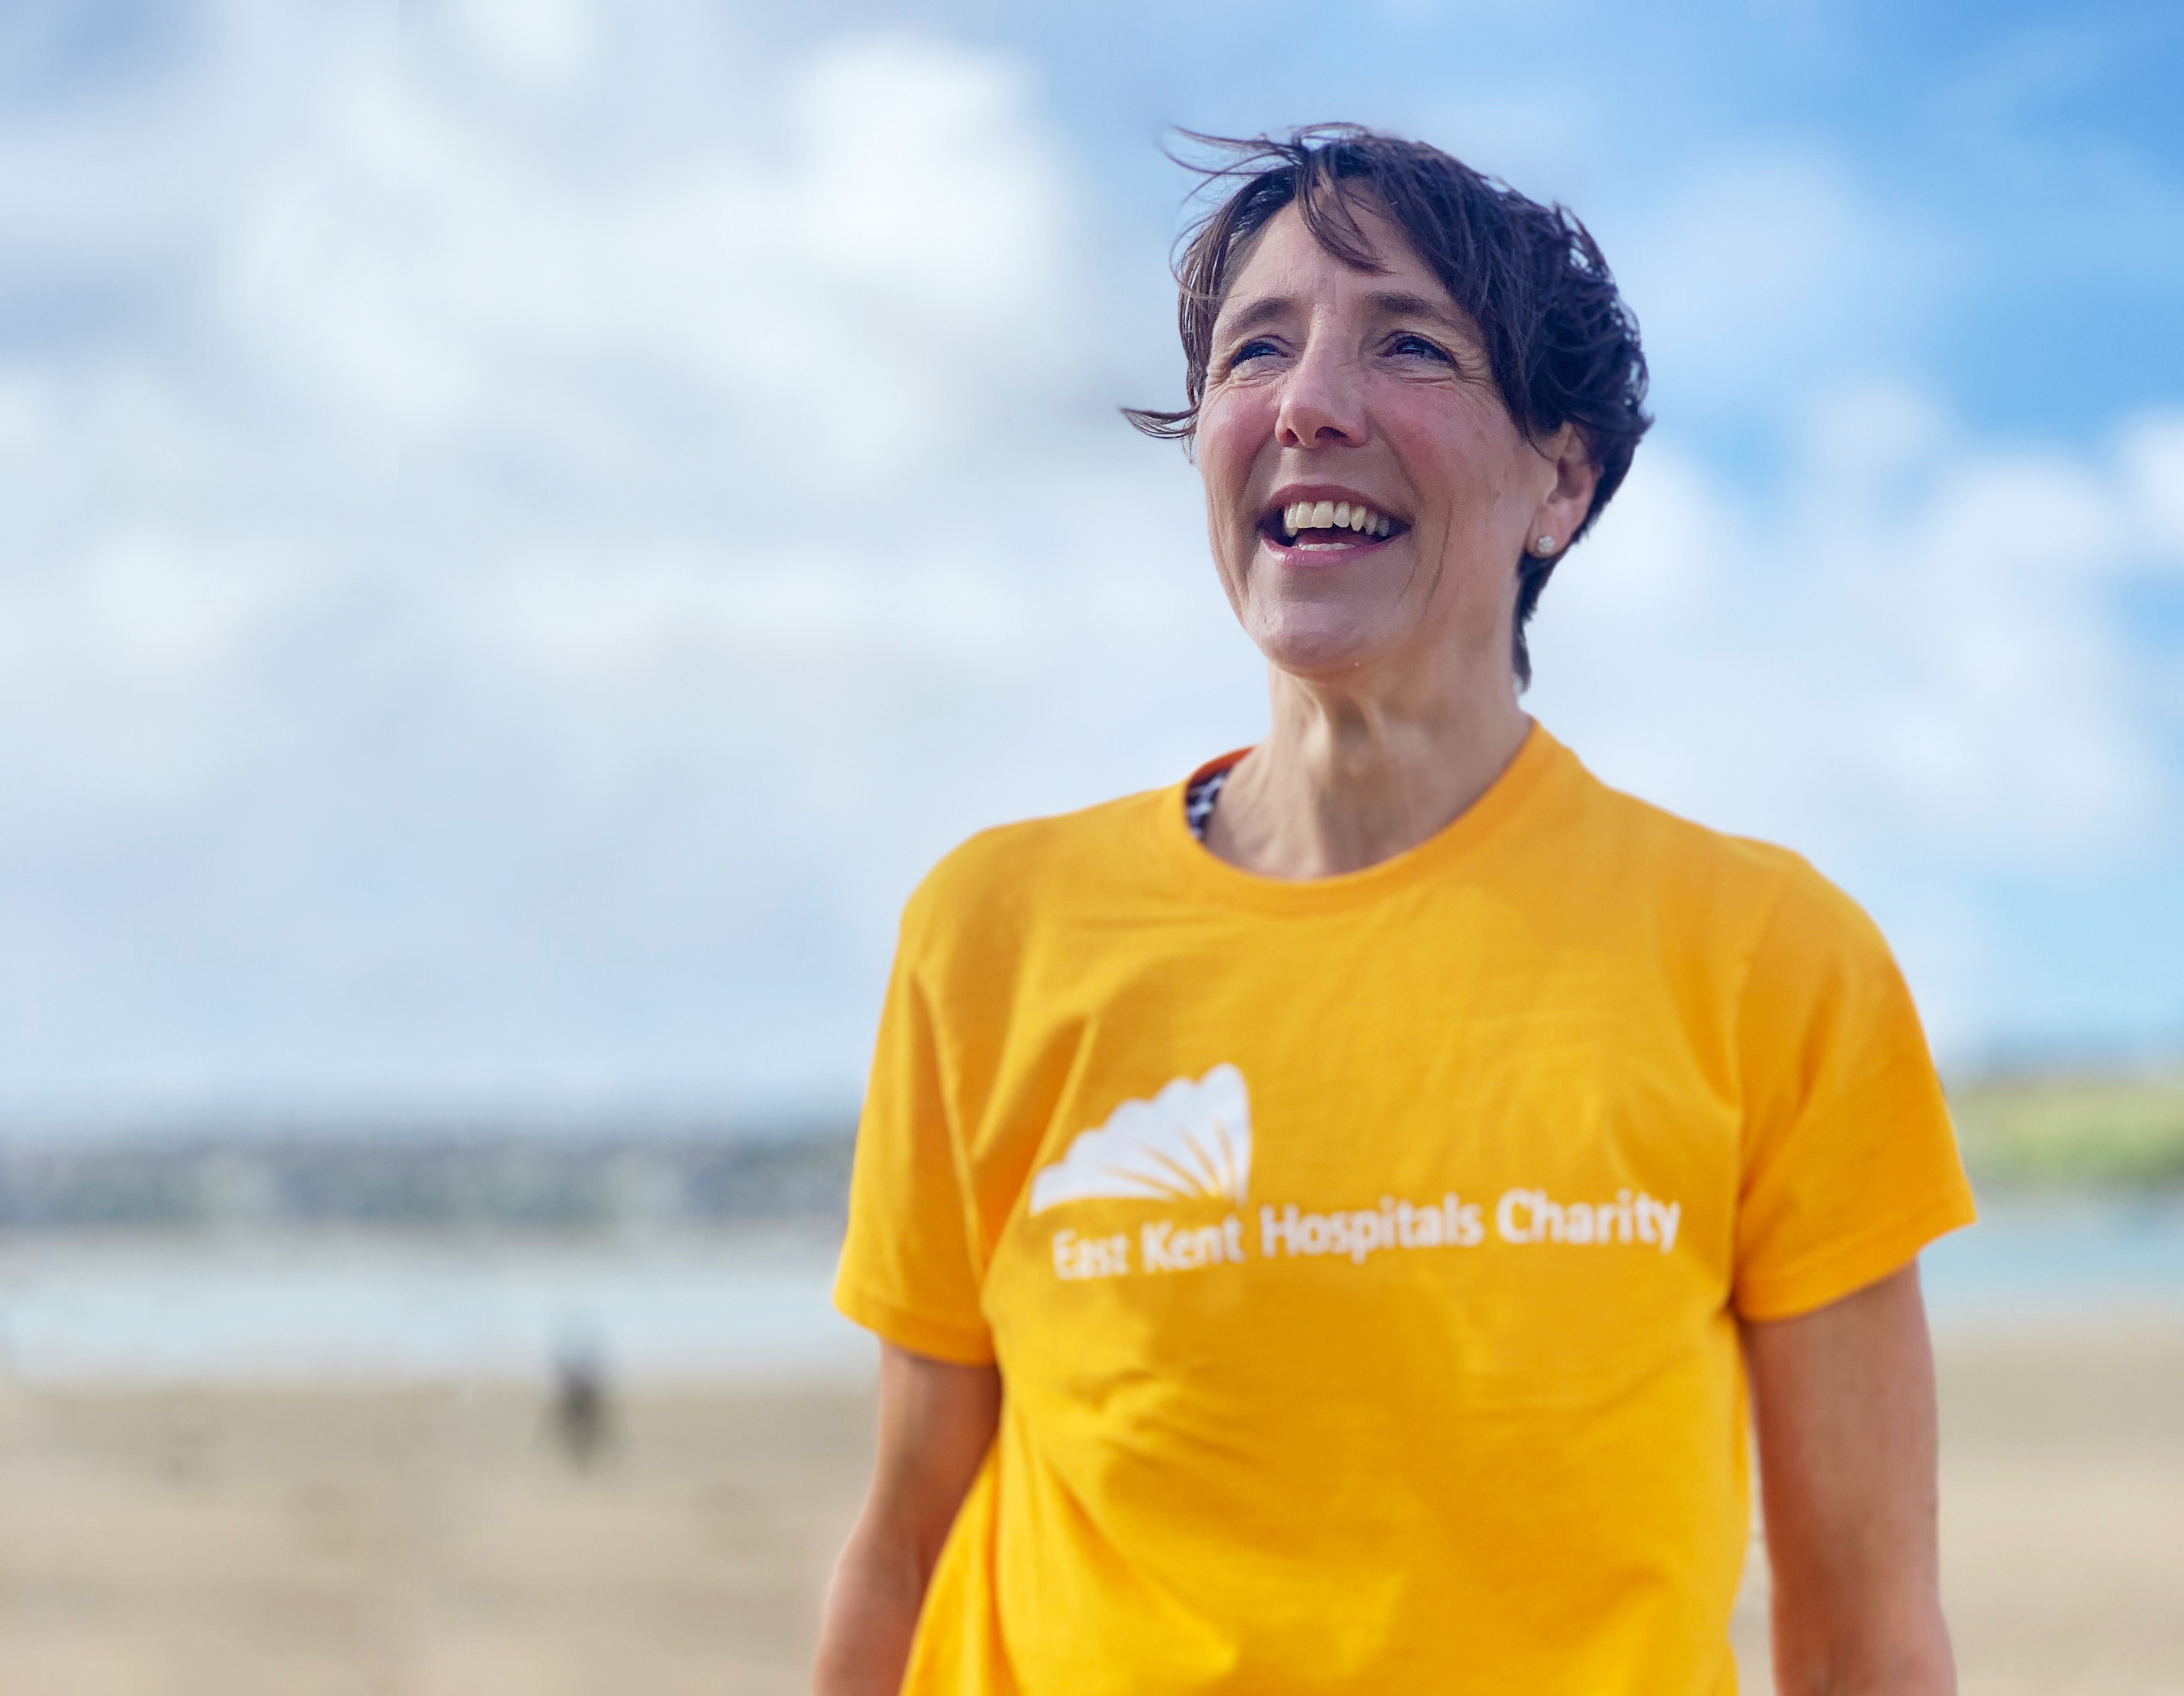 Marathon runner in support of East Kent Hospitals Charity